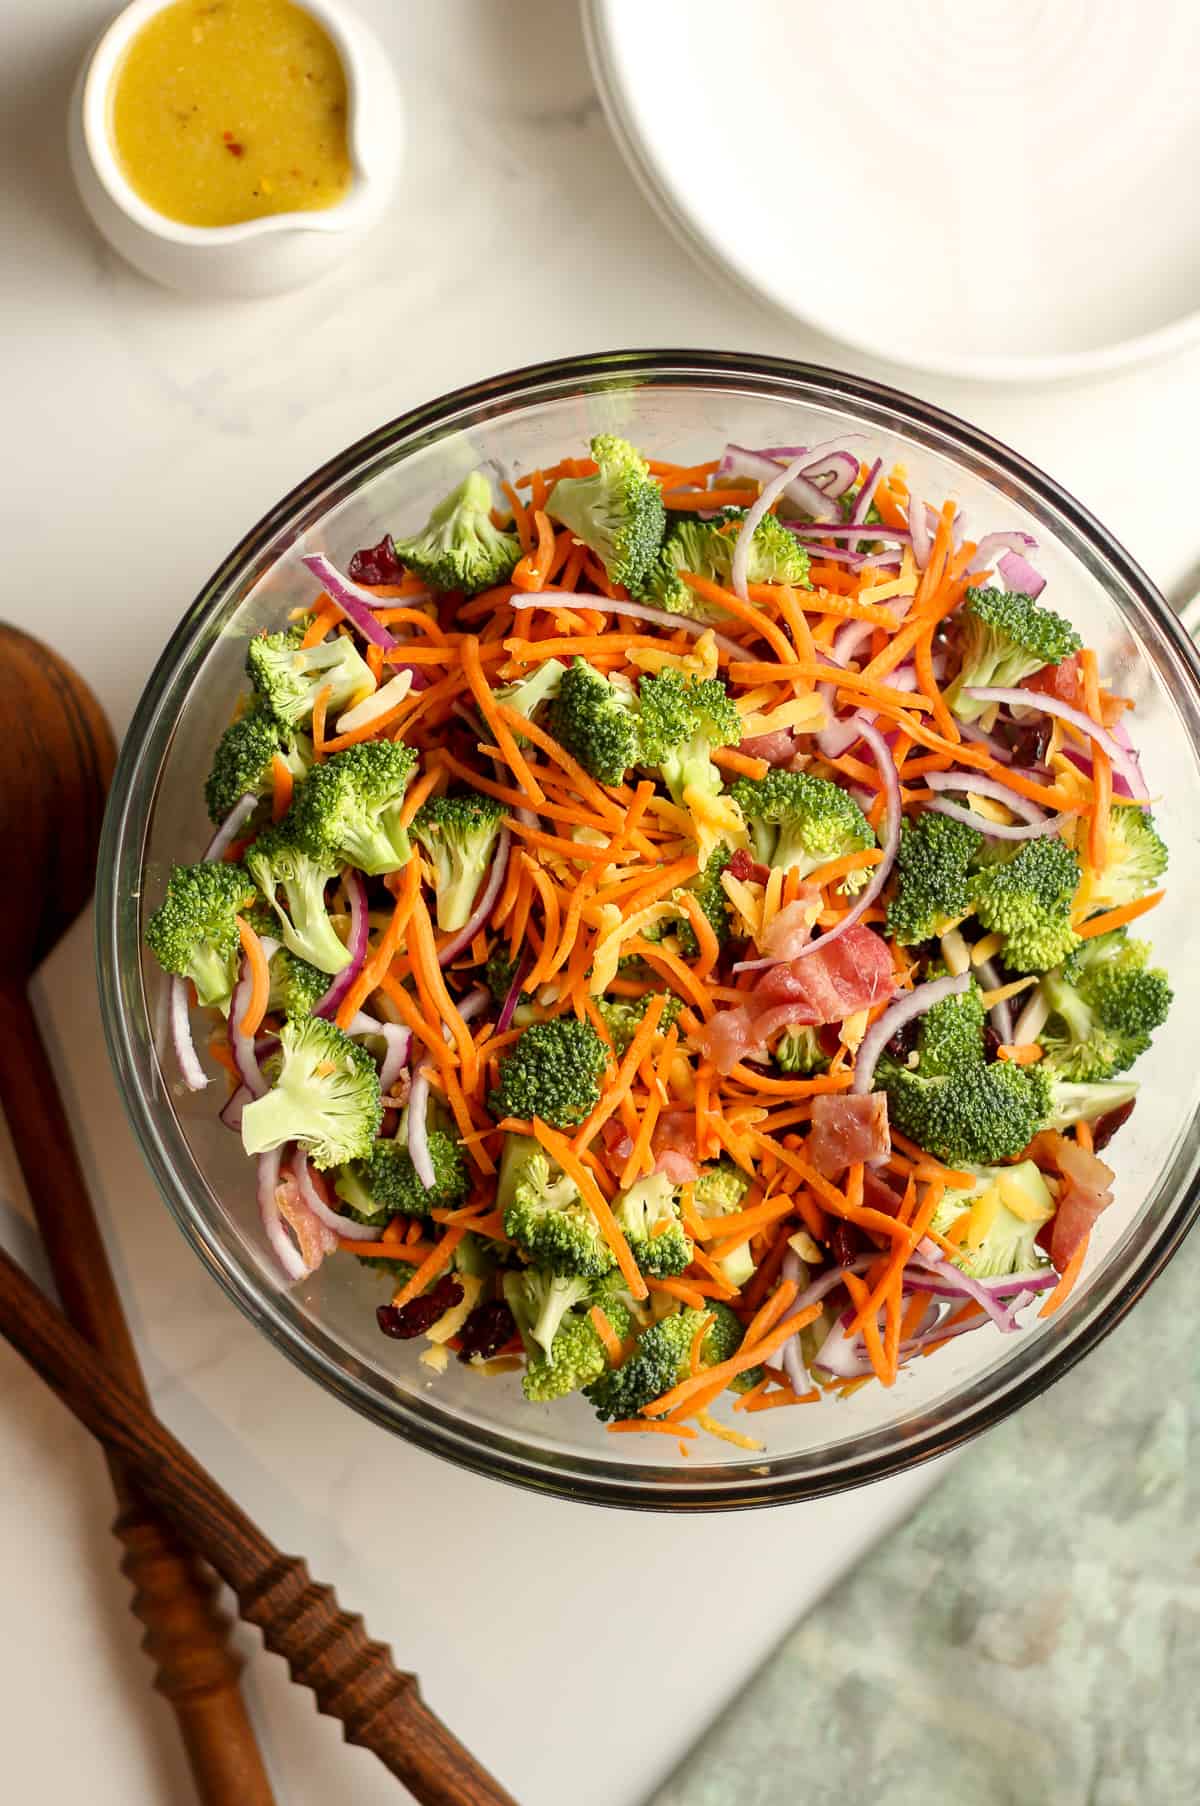 A glass bowl of the broccoli salad before adding the dressing.